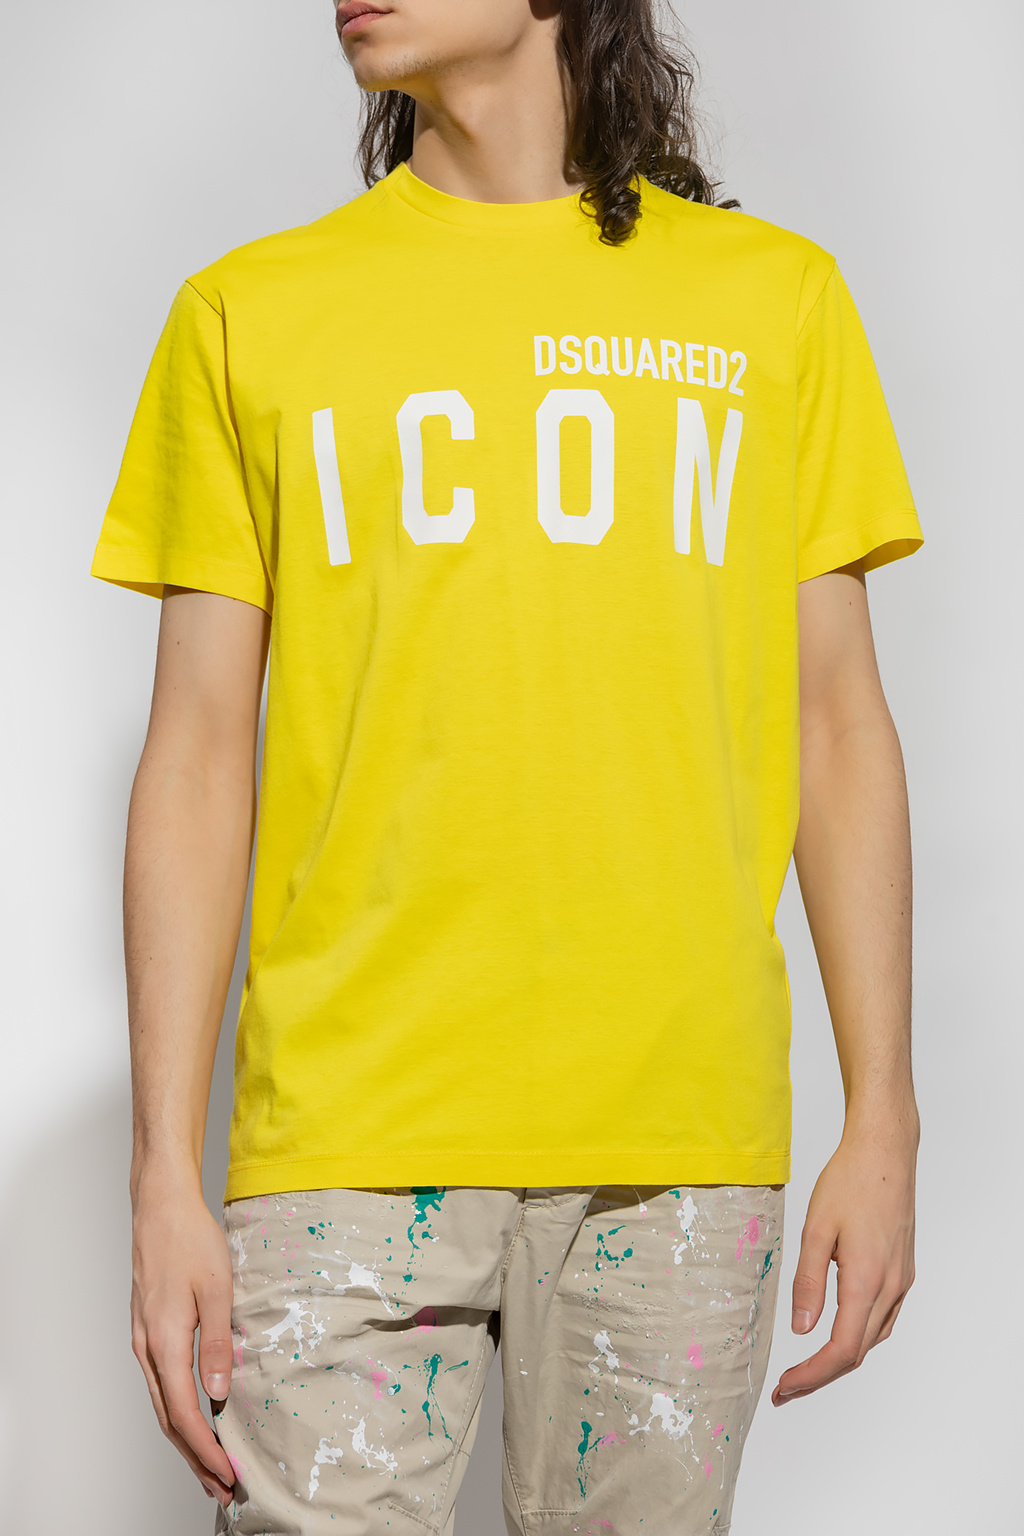 Dsquared2 Recommend these shirts